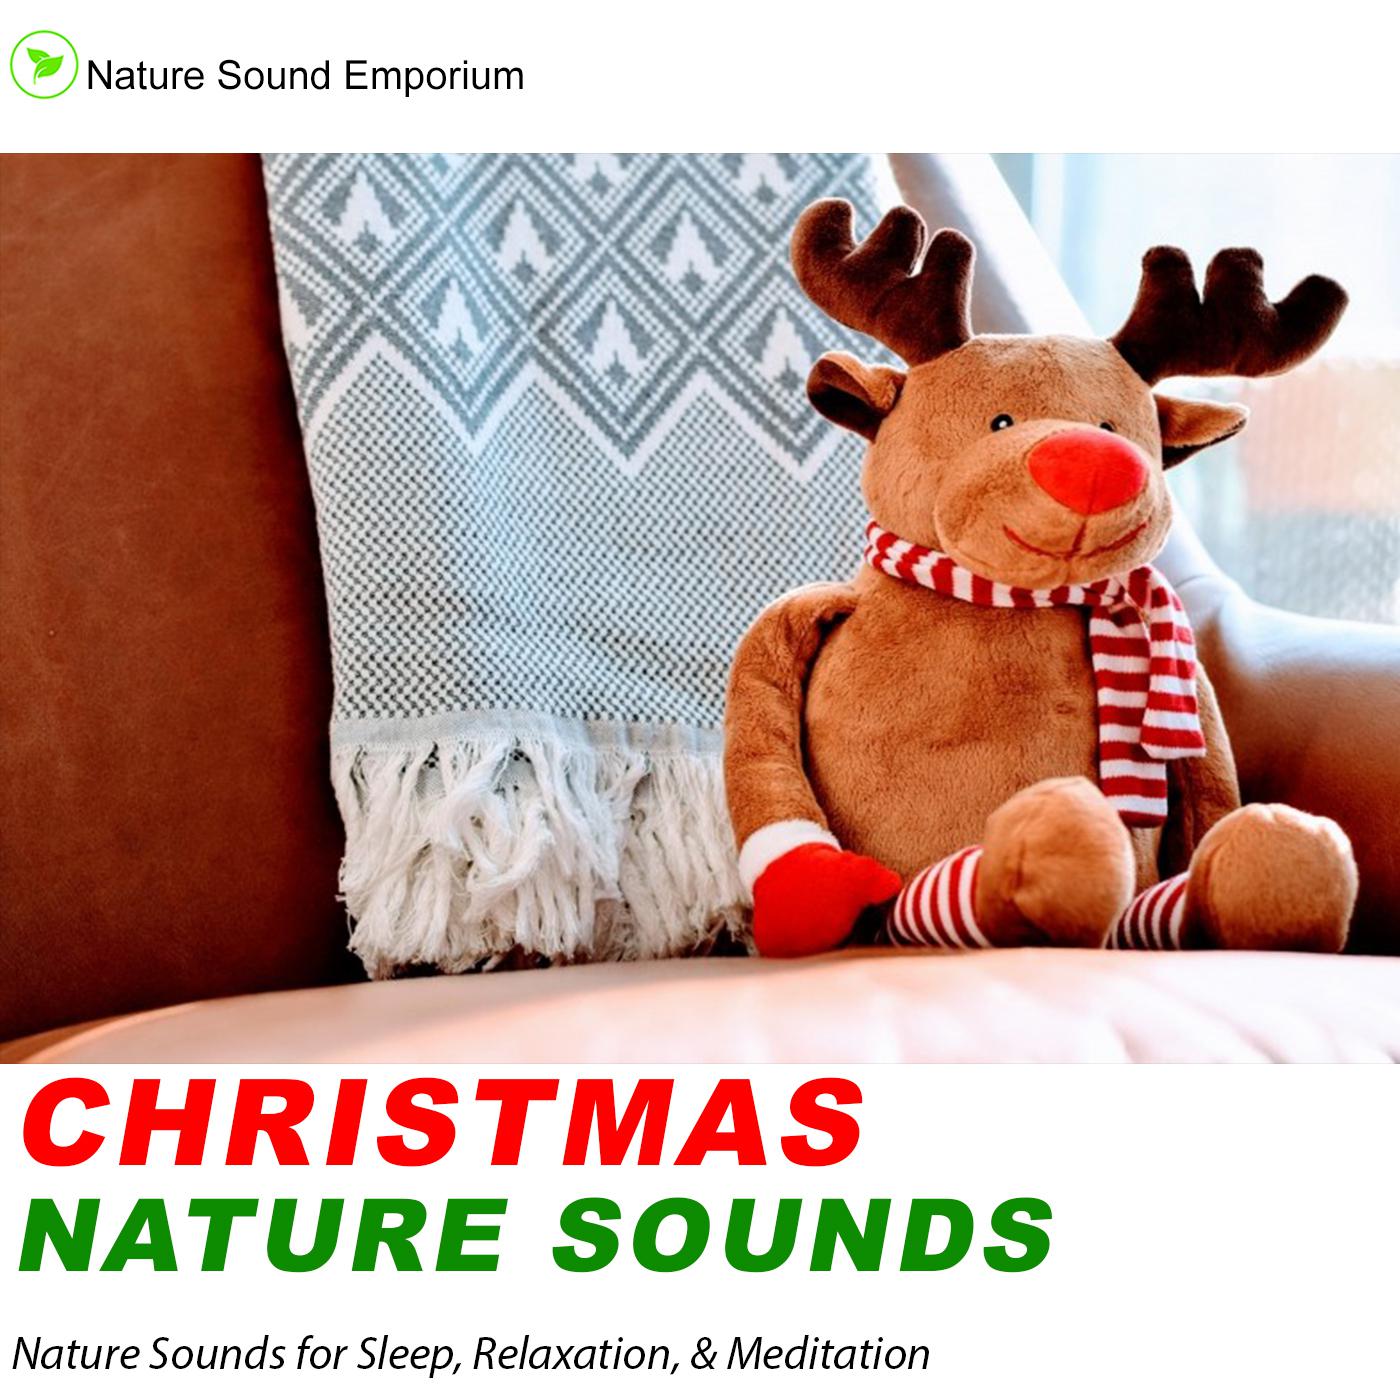 Nature Sounds - Christmas Nature Sounds -Nature Sounds for Relaxation, Meditation, Studying & Deep Sleep Part 1